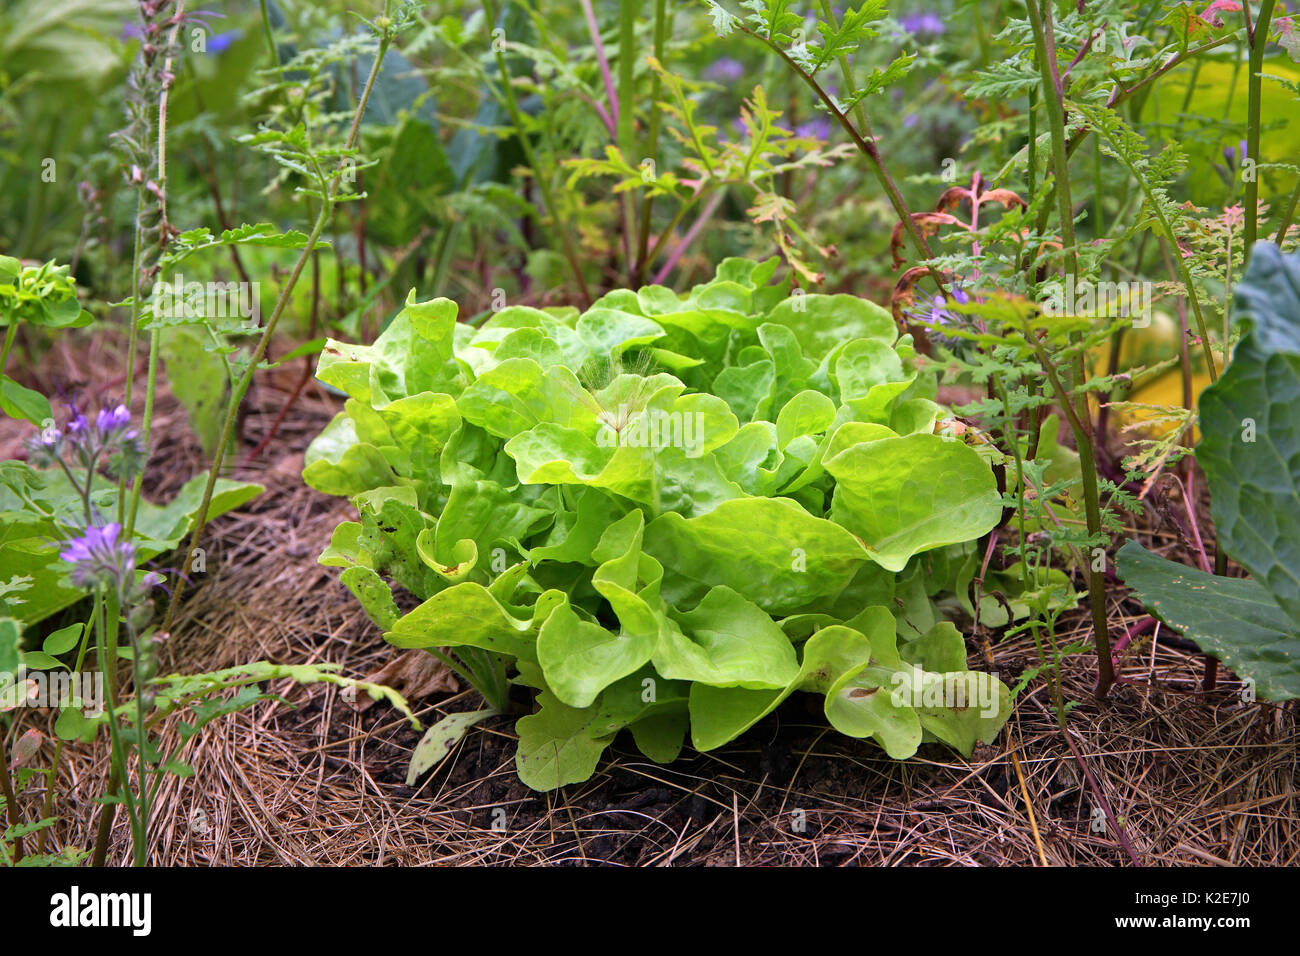 Green head of lettuce on a hillside in farm garden, floor covering with grass cut against dehydration, Germany Stock Photo